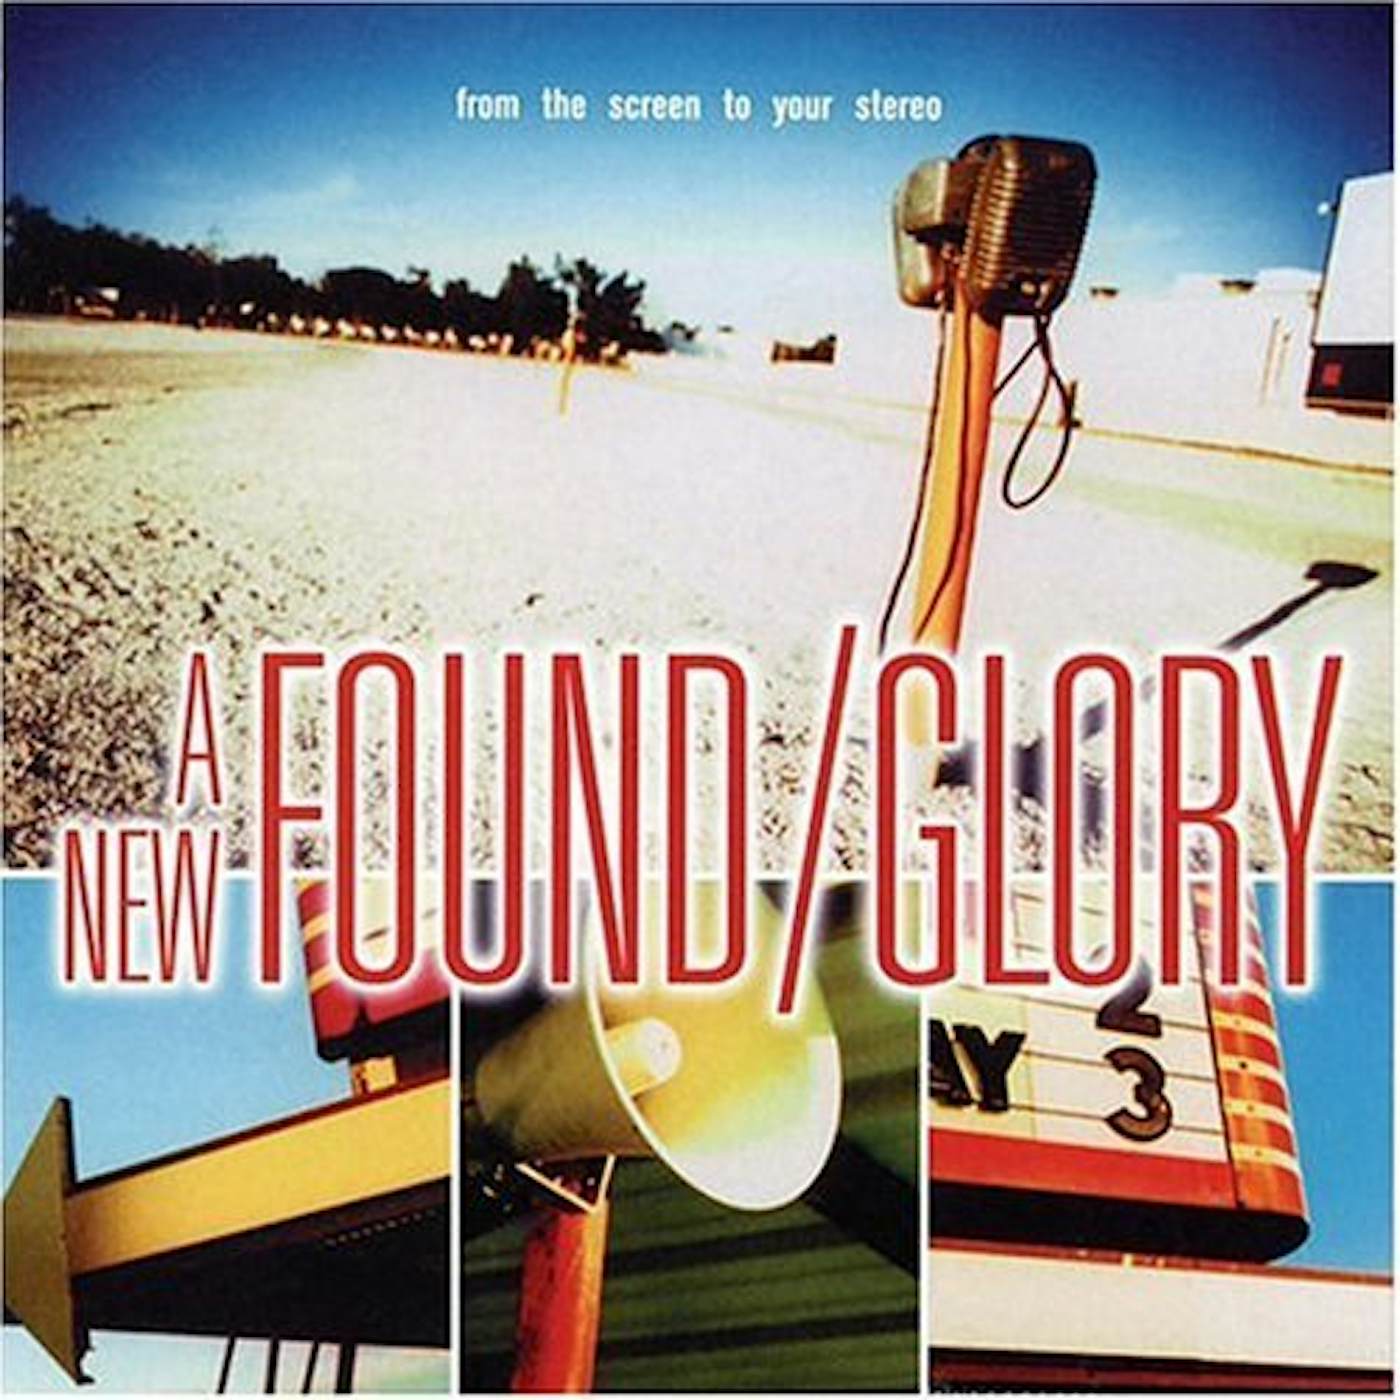 New Found Glory FROM THE SCREEN TO YOUR STEREO CD